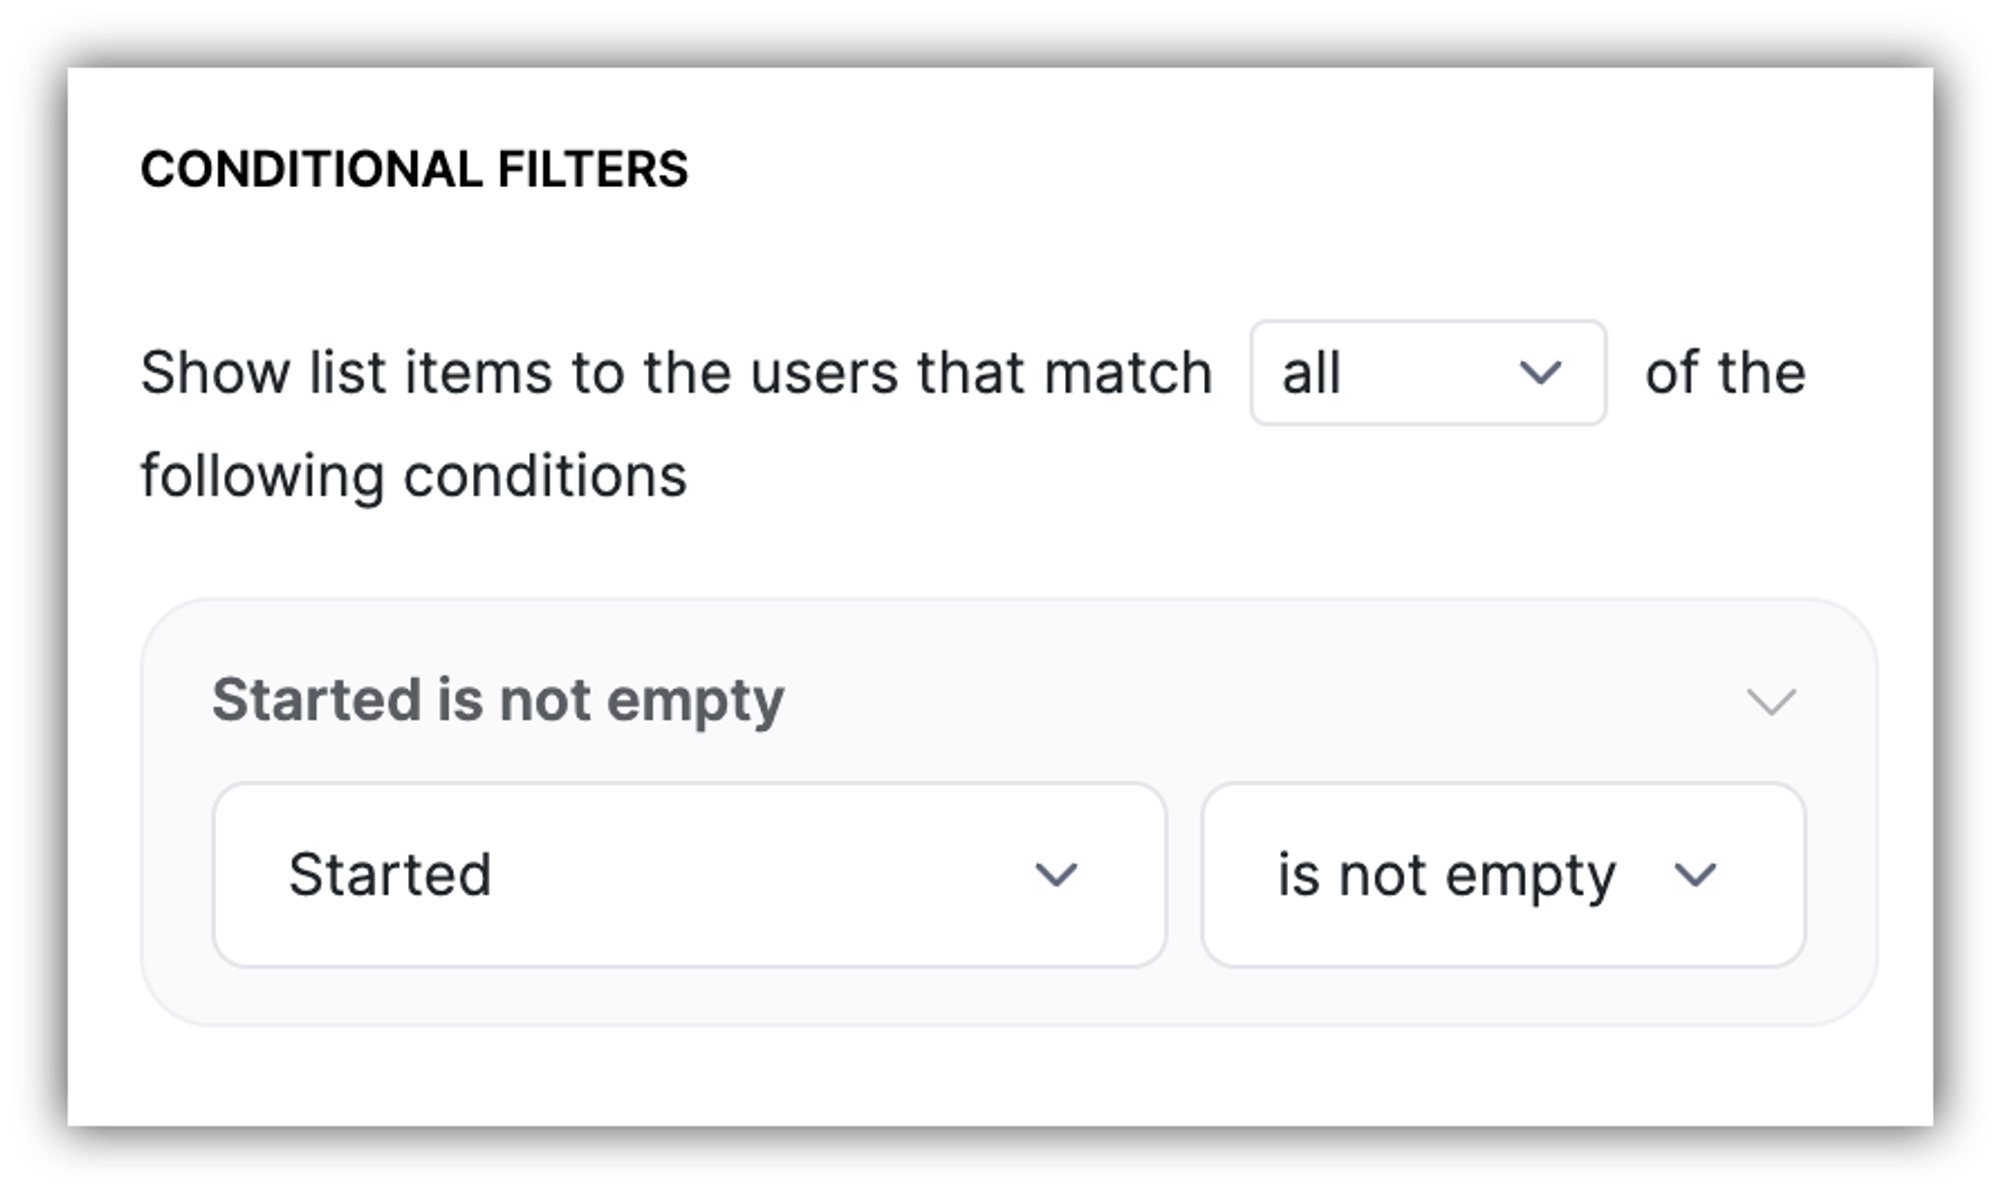 "is not empty" condition for showing checked items